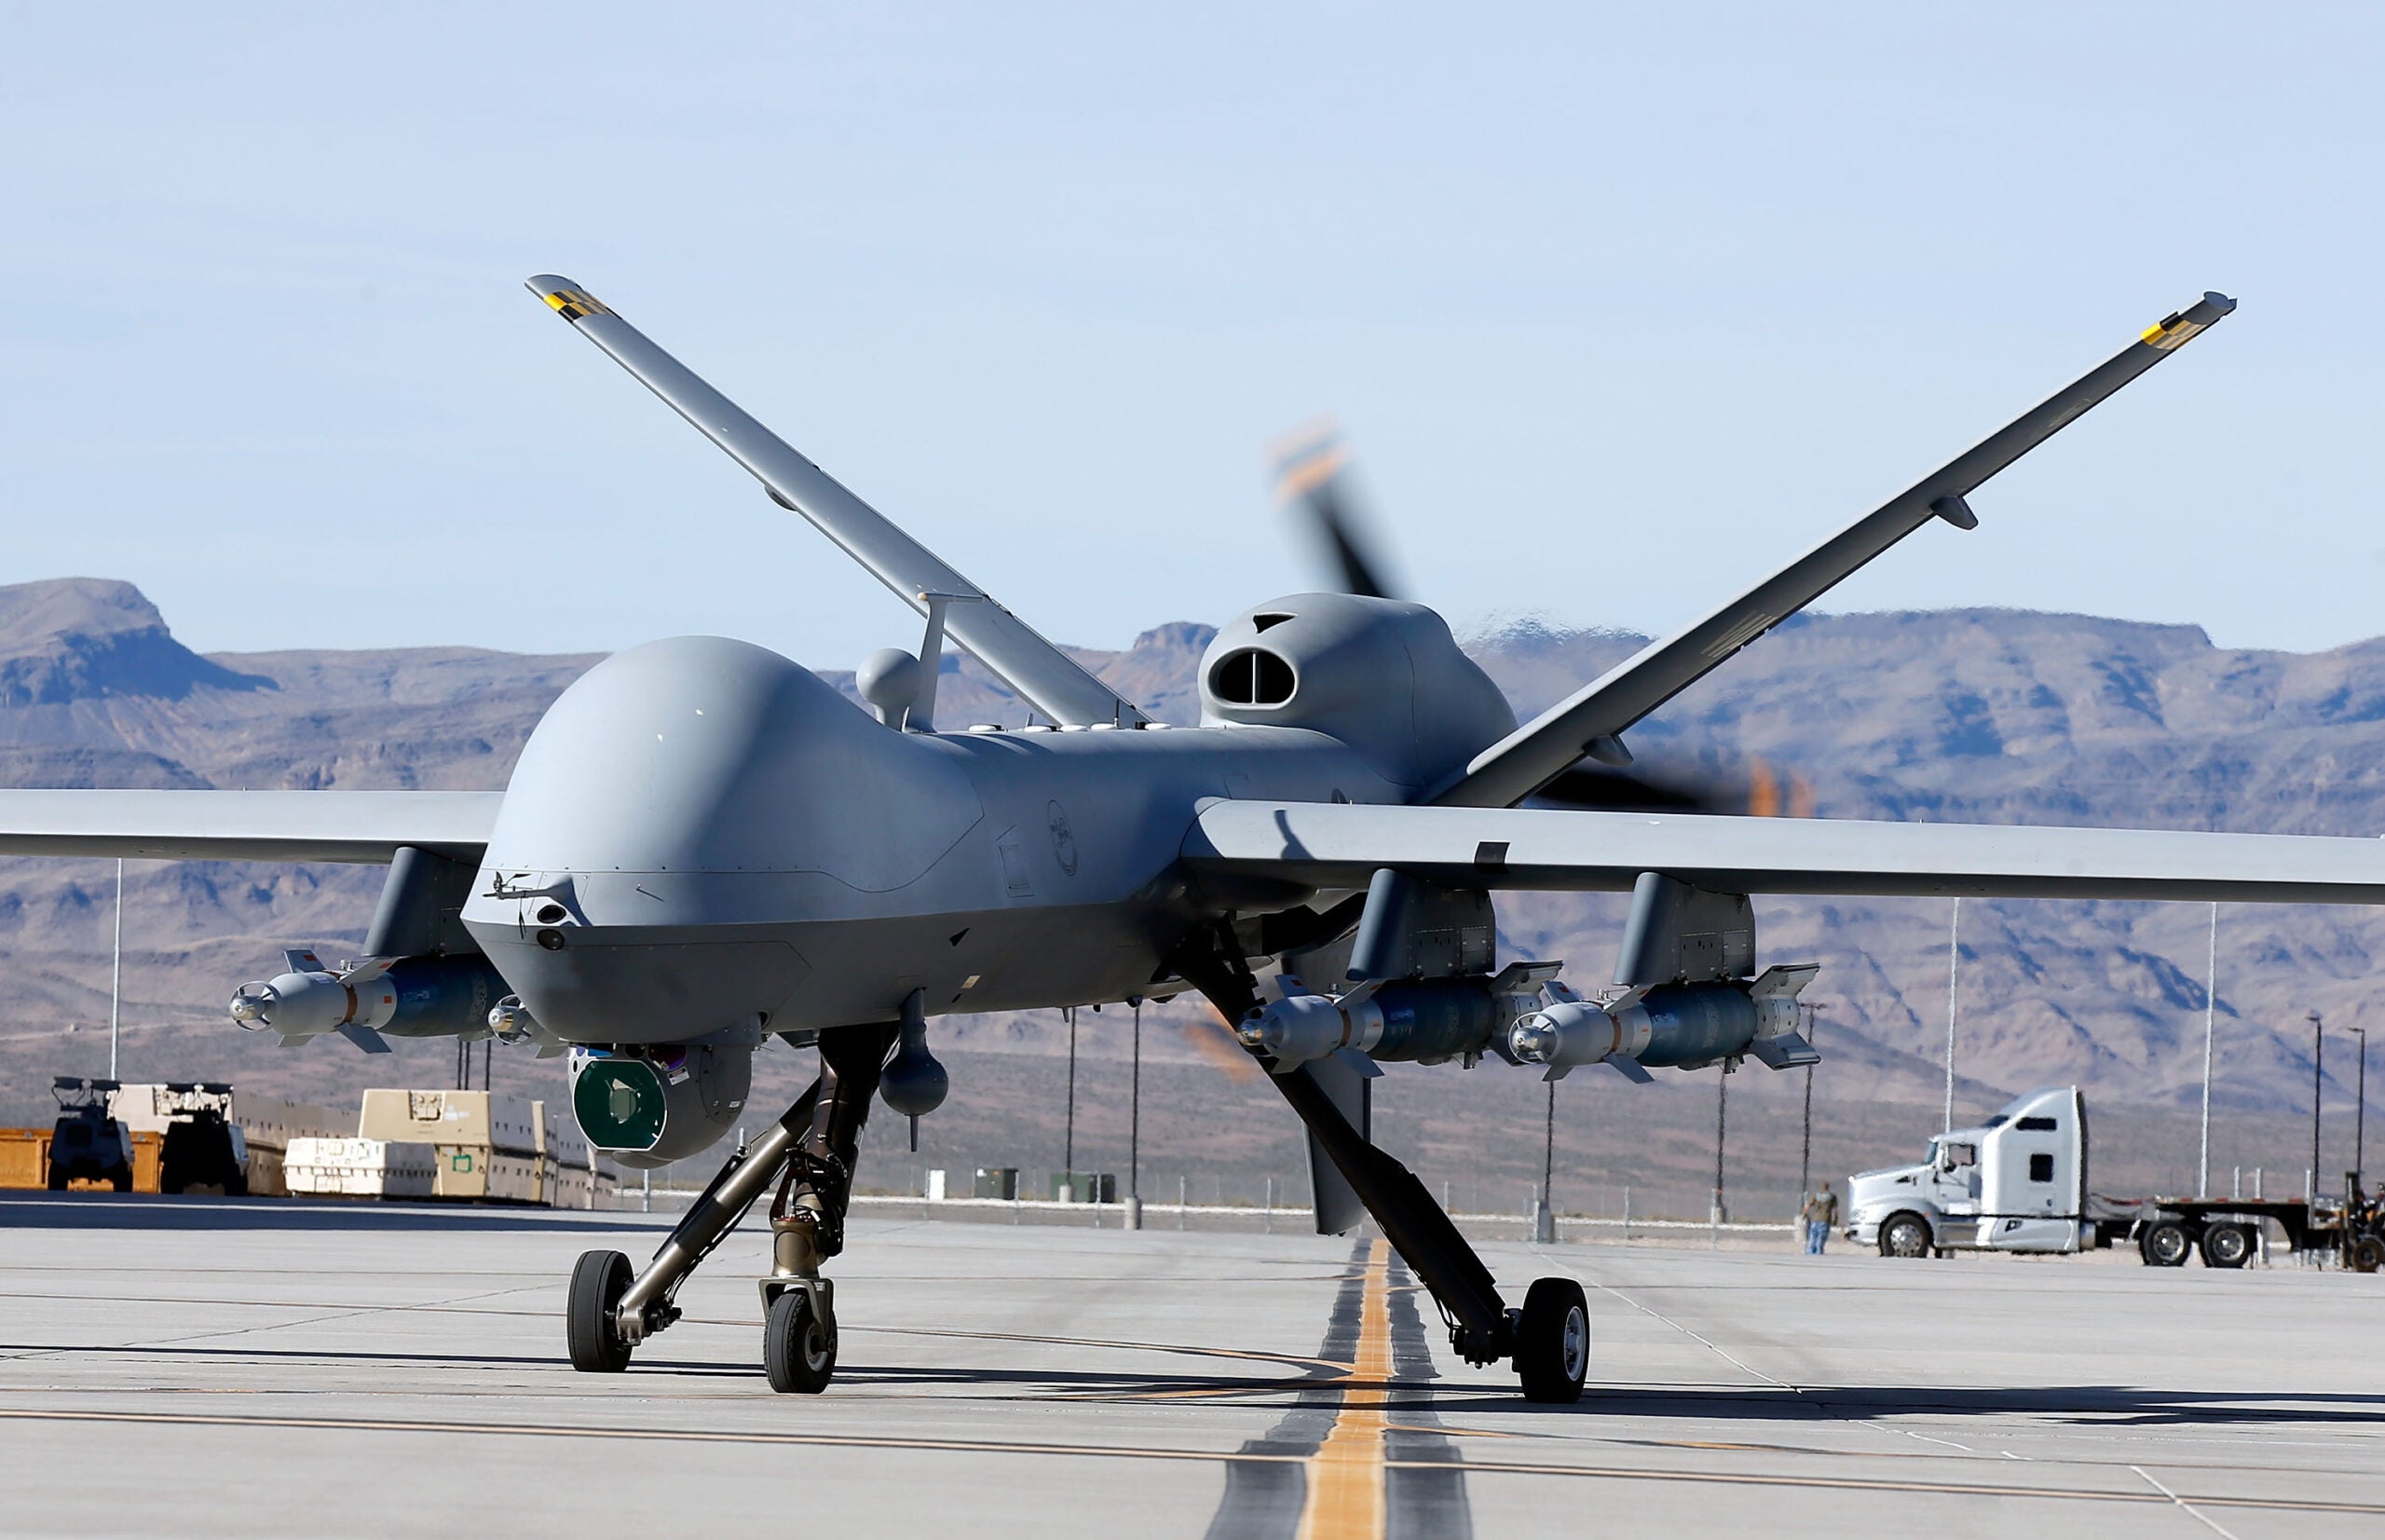 INDIAN SPRINGS, NV - NOVEMBER 17:  (EDITORS NOTE: Image has been reviewed by the U.S. Military prior to transmission.) An MQ-9 Reaper remotely piloted aircraft (RPA) taxis during a training mission at Creech Air Force Base on November 17, 2015 in Indian Springs, Nevada. The Pentagon has plans to expand combat air patrols flights by remotely piloted aircraft by as much as 50 percent over the next few years to meet an increased need for surveillance, reconnaissance and lethal airstrikes in more areas around the world.  (Photo by Isaac Brekken/Getty Images)